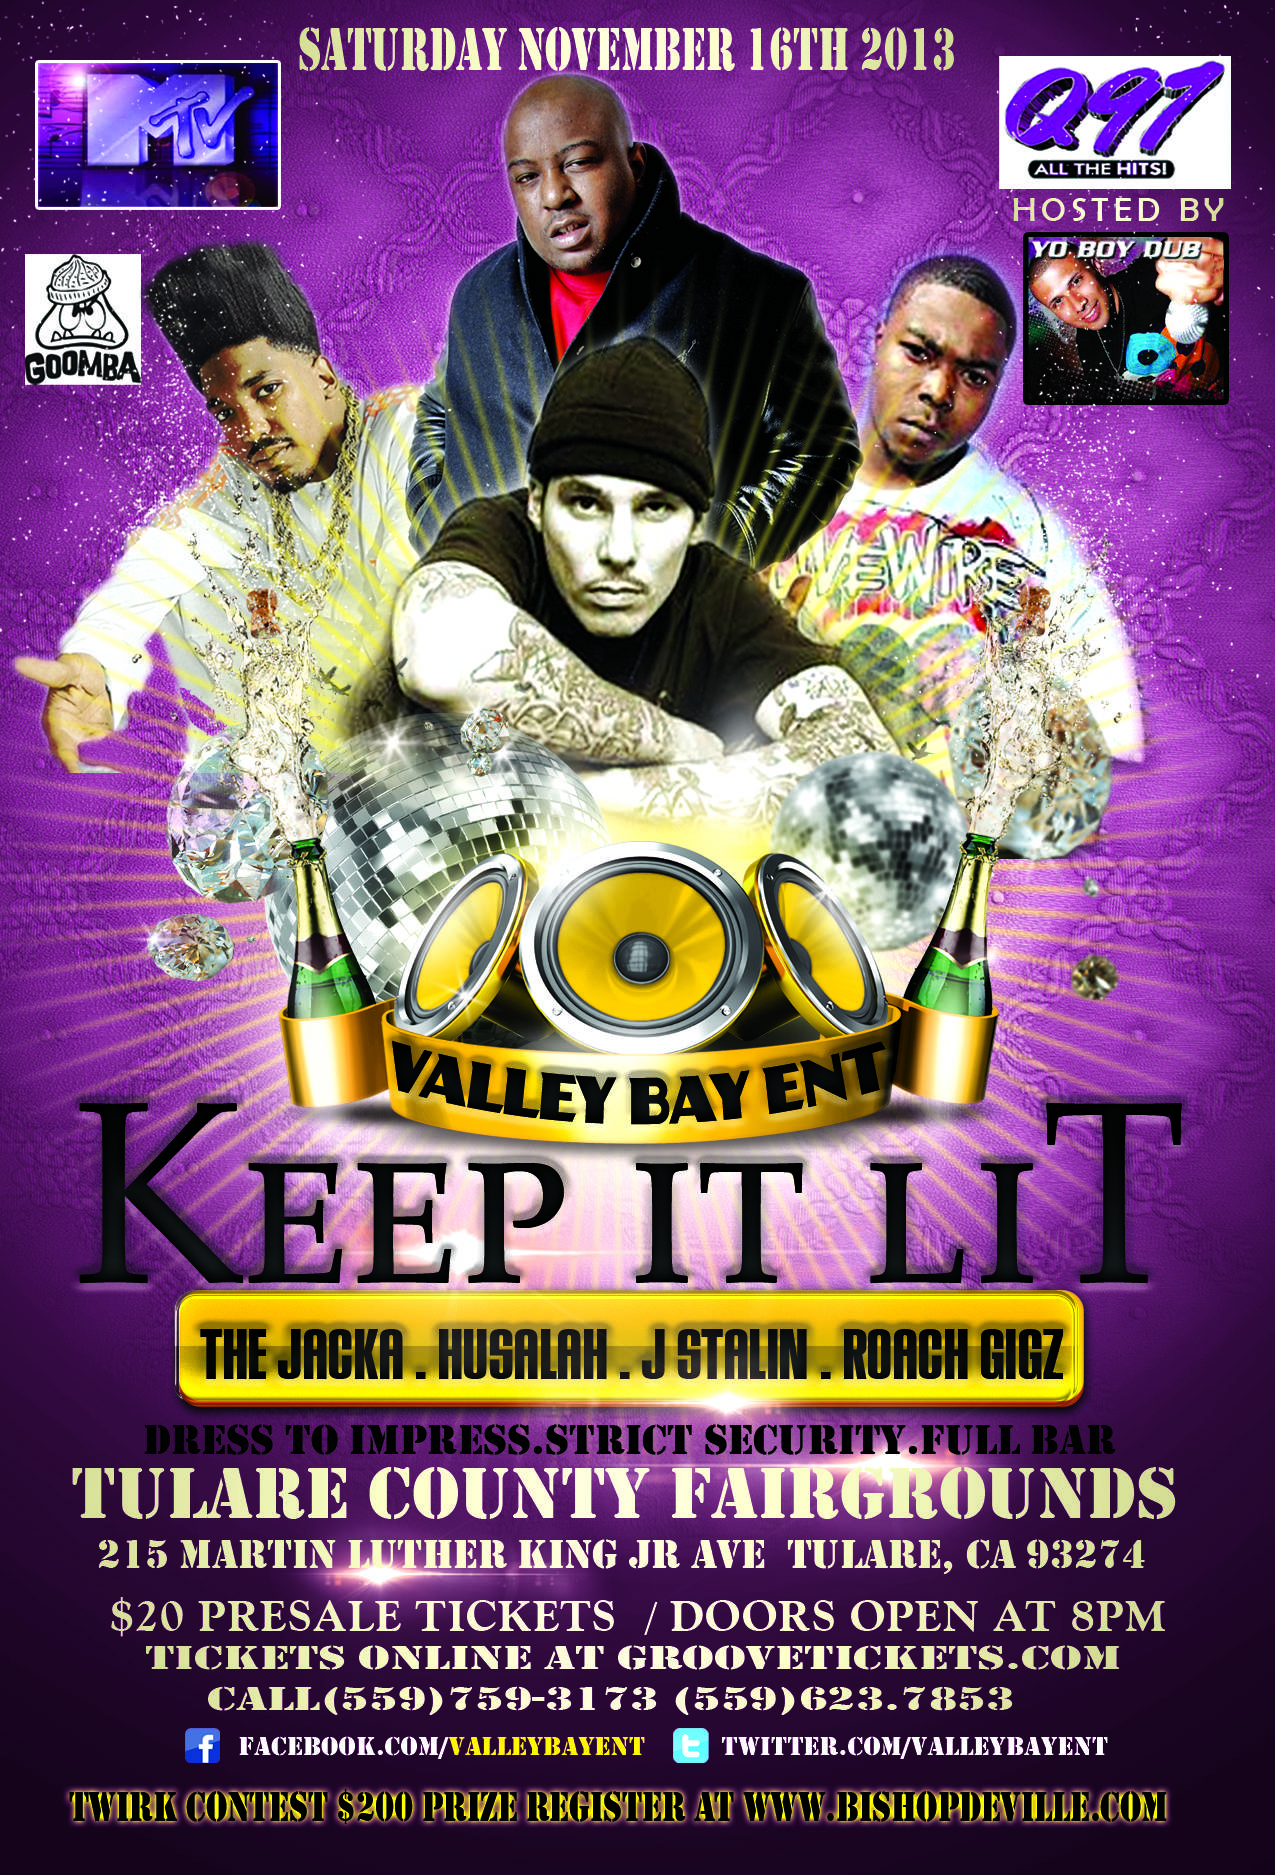 Buy Tickets to Keep it lit Tour/ GL3 in Tulare